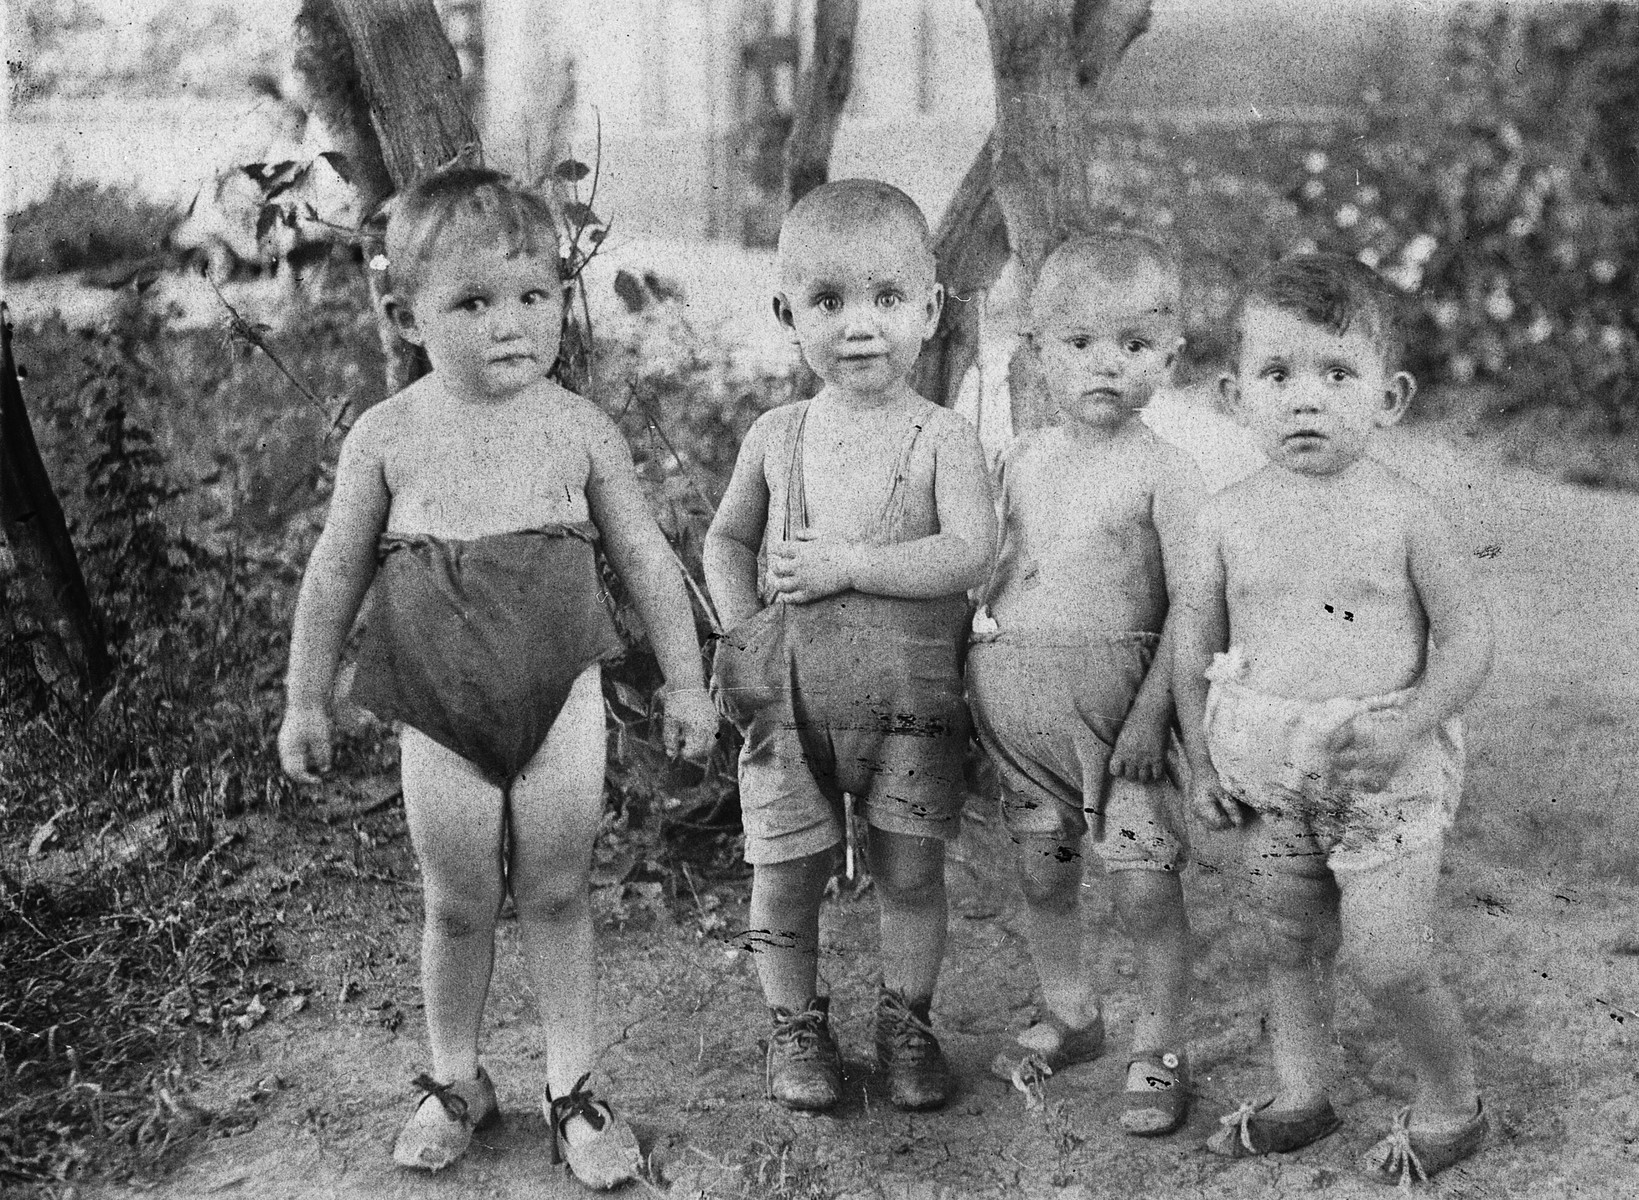 Portrait of four young children in a Soviet children's home in the Ukraine.

Pictured on the far left is Ludmilla Iastuhina.